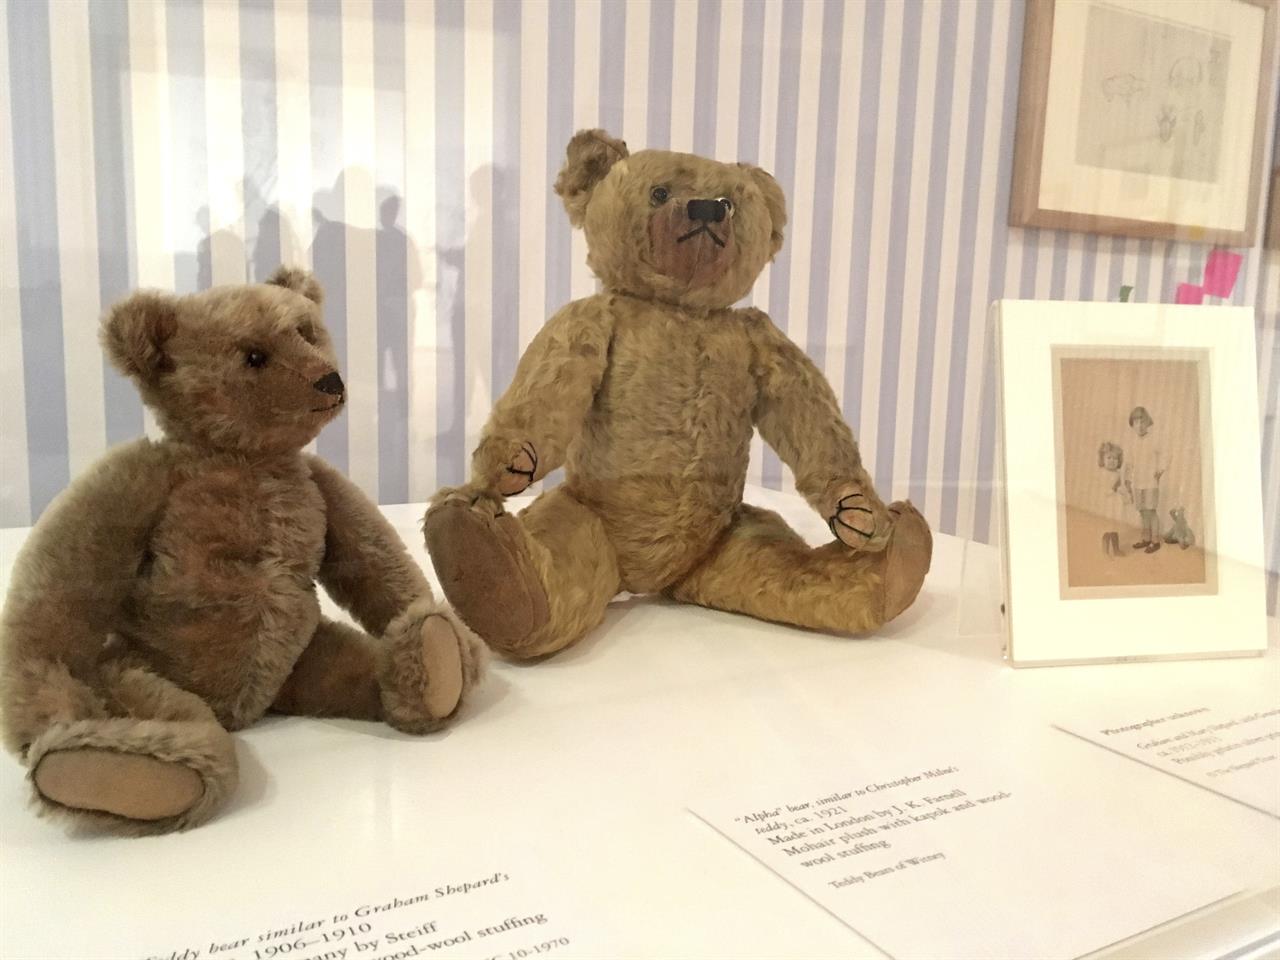 Silly old bear: Exhibition explores world of Winnie-the-Pooh | AM 920